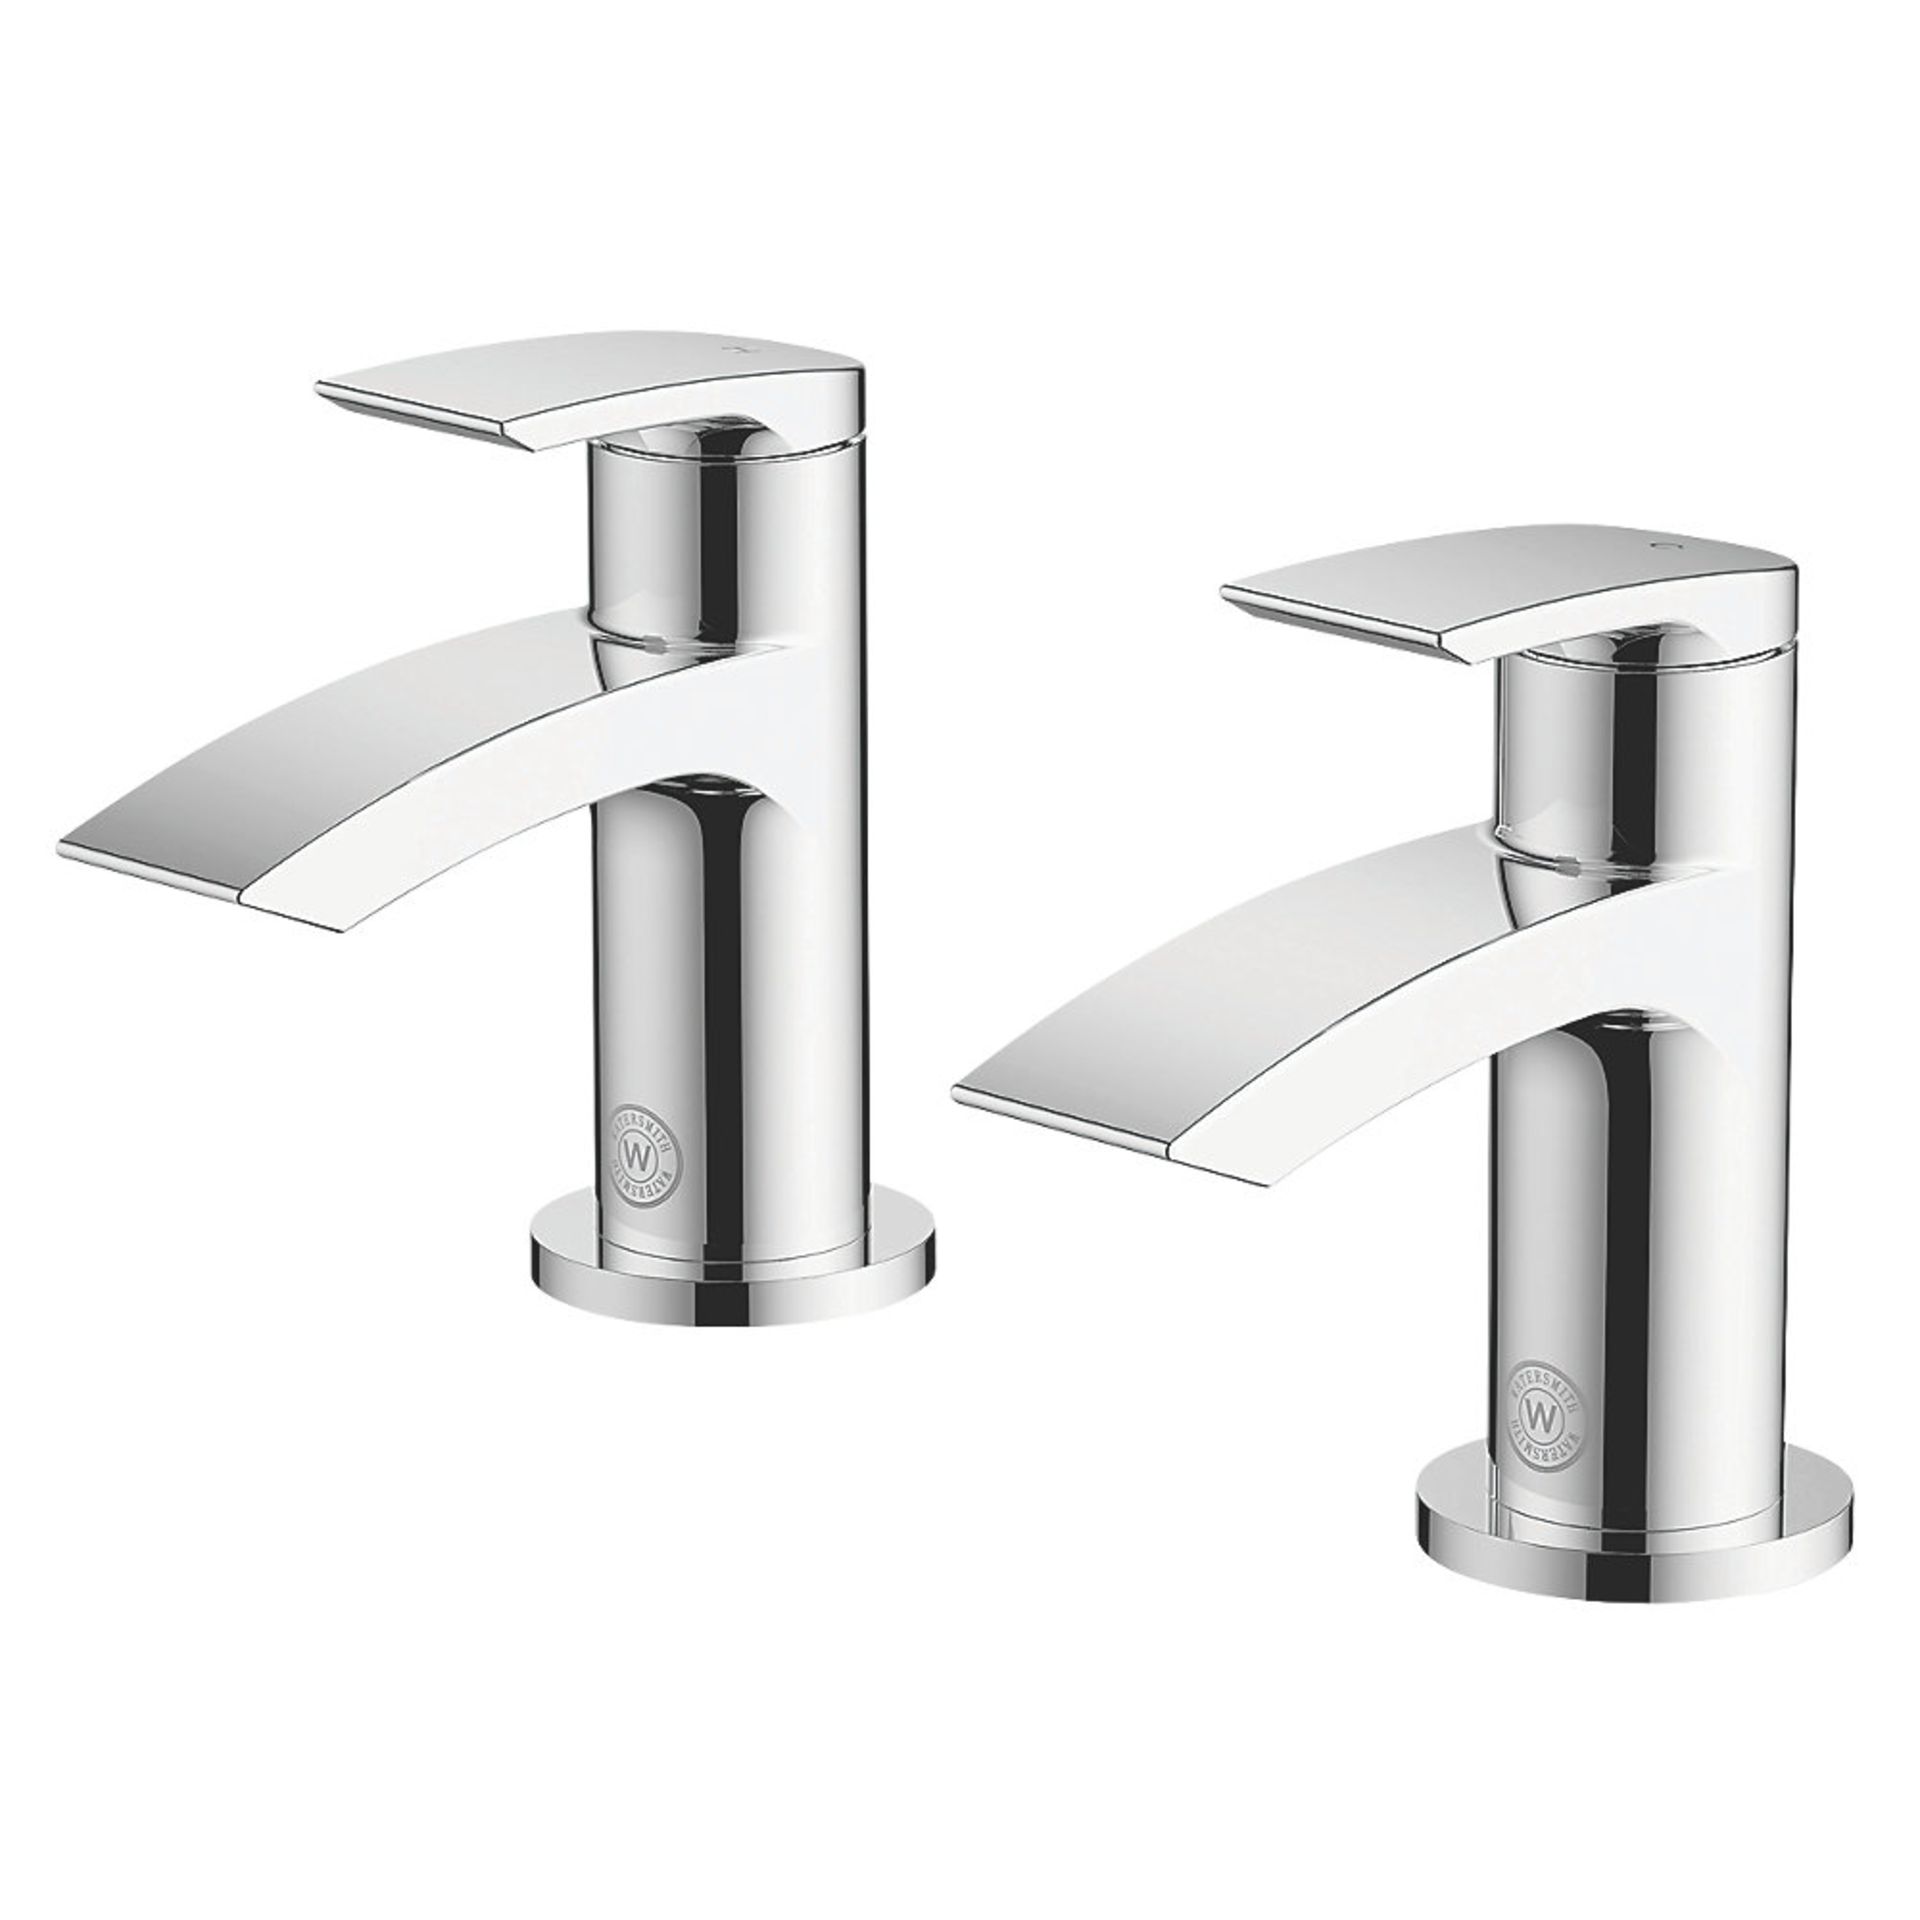 (LL27) Watersmith Heritage Wye Pair of Bath Taps. _ turn operation. Chrome-plated brass. Combines